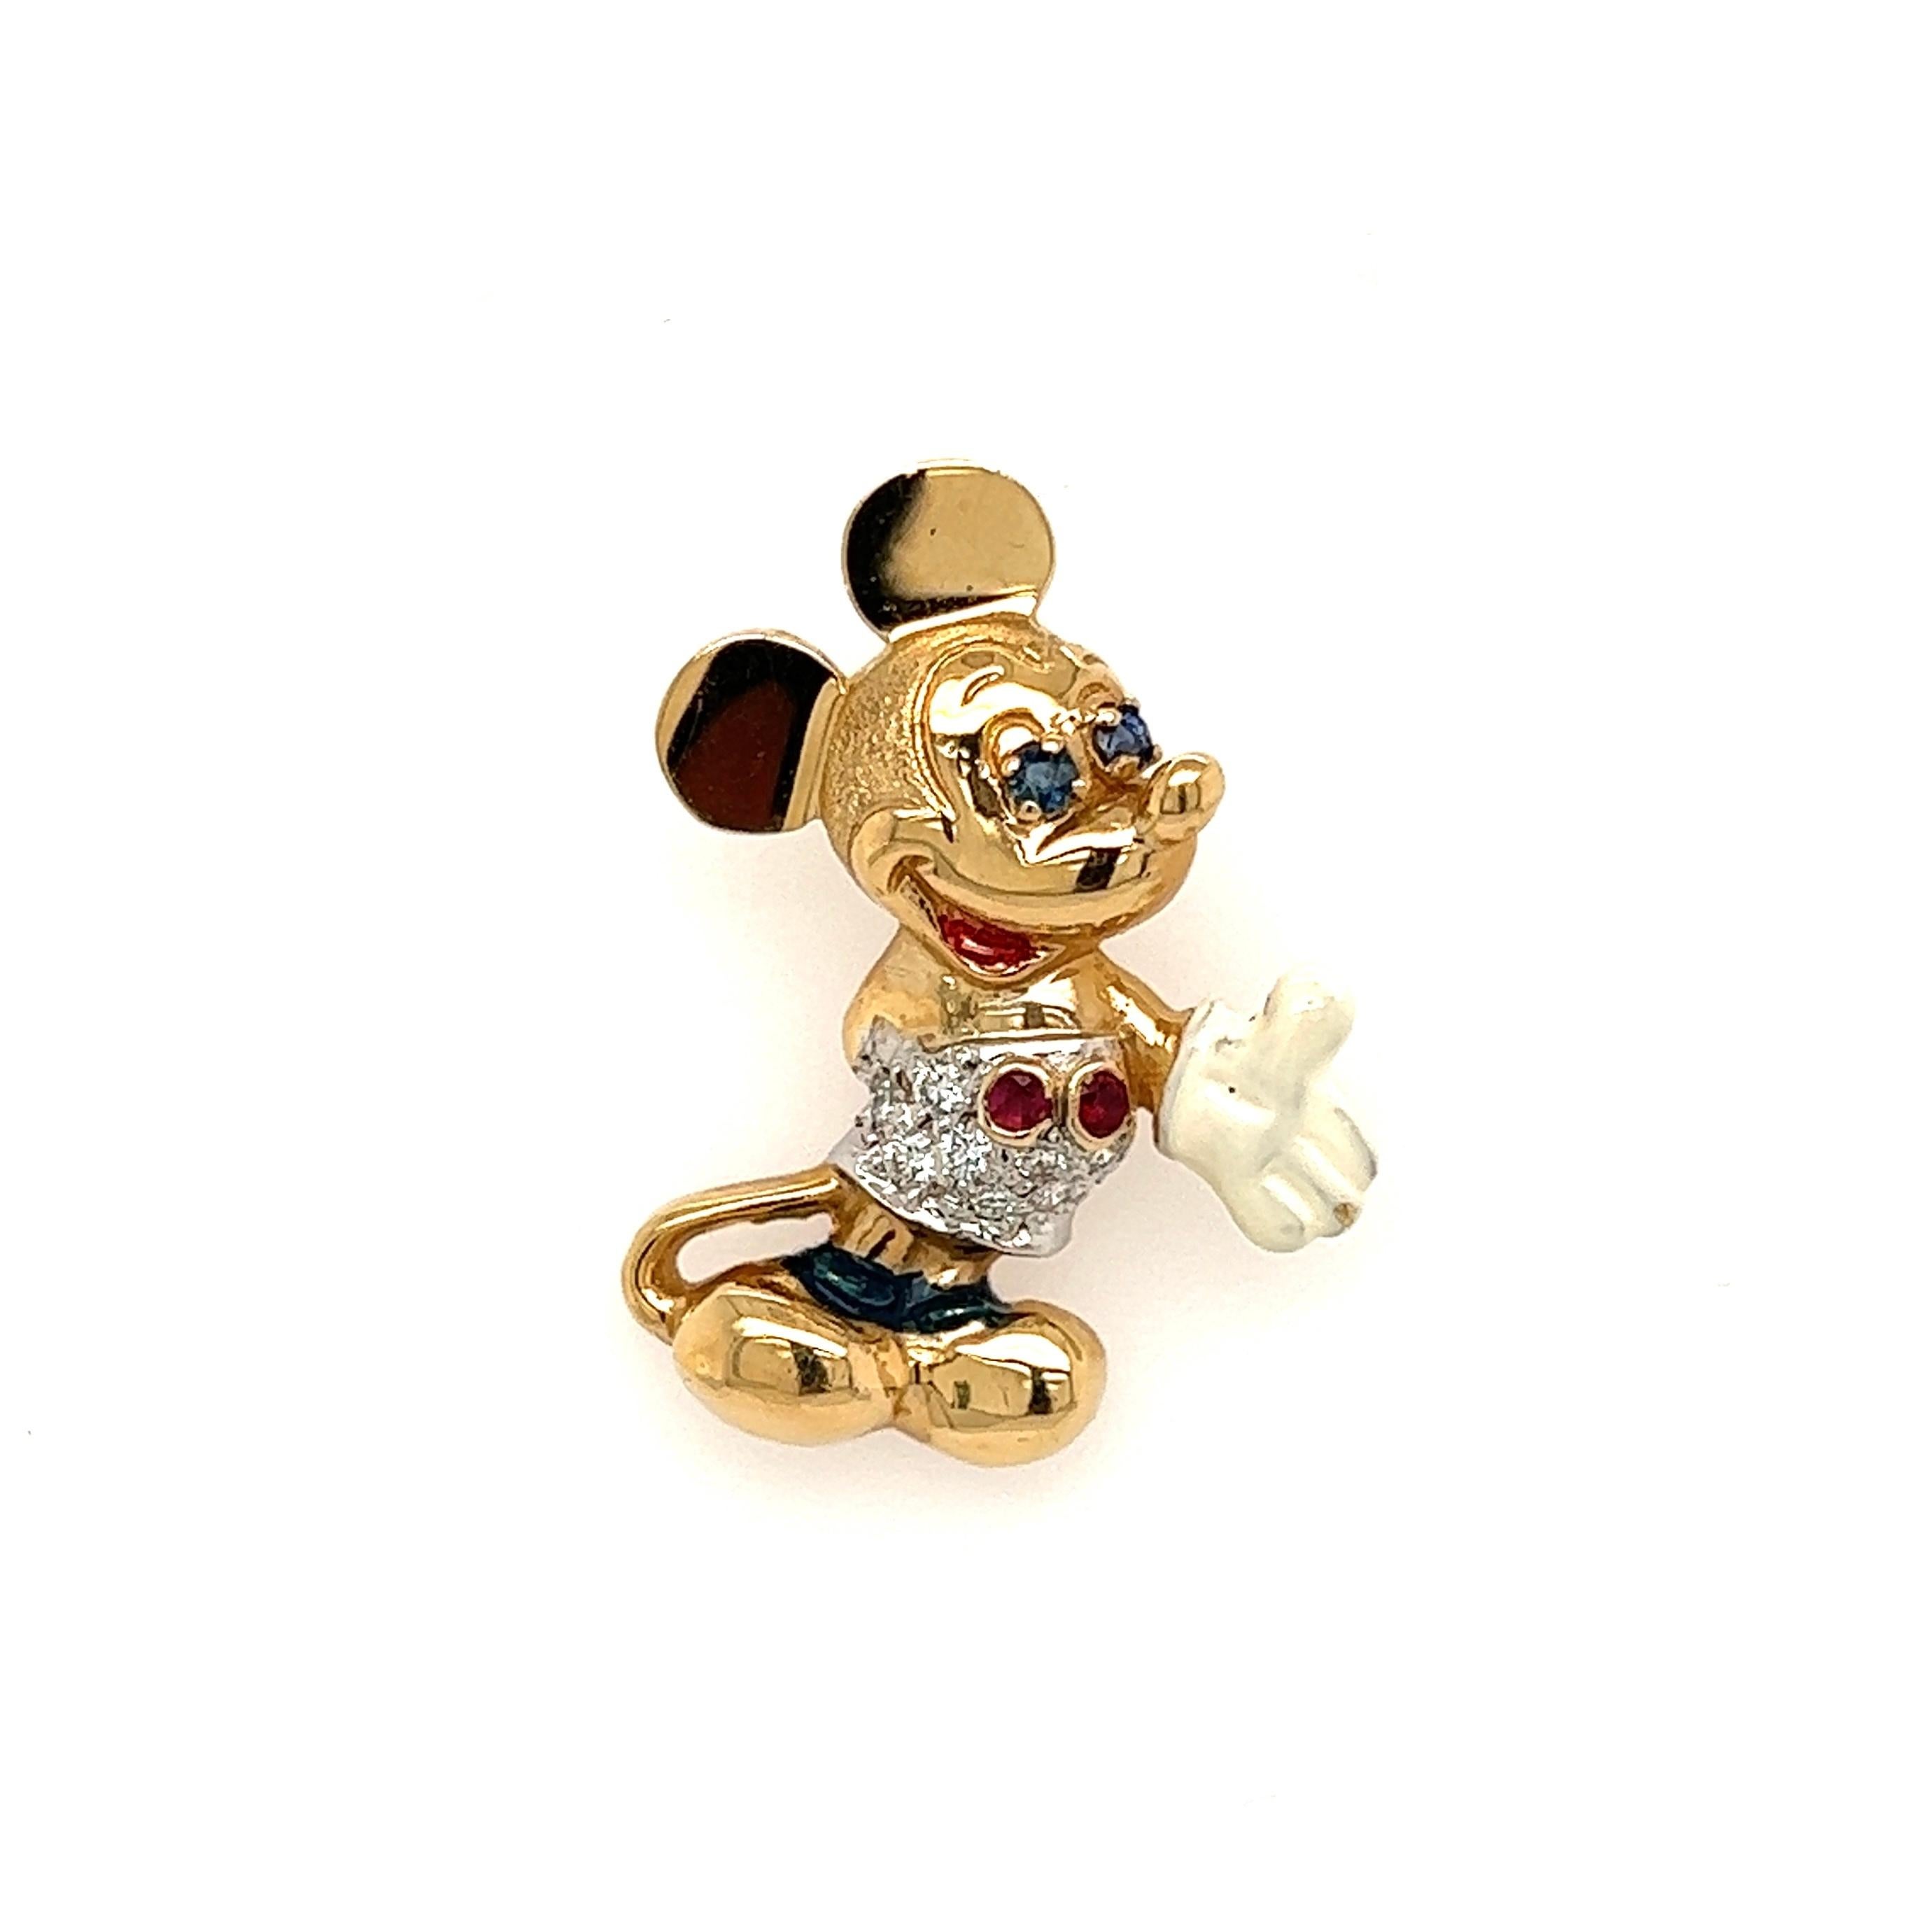 Delightful and Finely Detailed Walt Disney Mickey Mouse Enamel Gold Charm Pendant. Hand crafted in 14K Yellow Gold. Hand set with Rubies, Sapphires and Diamonds. Measuring approx. 1.10” l x 0.80